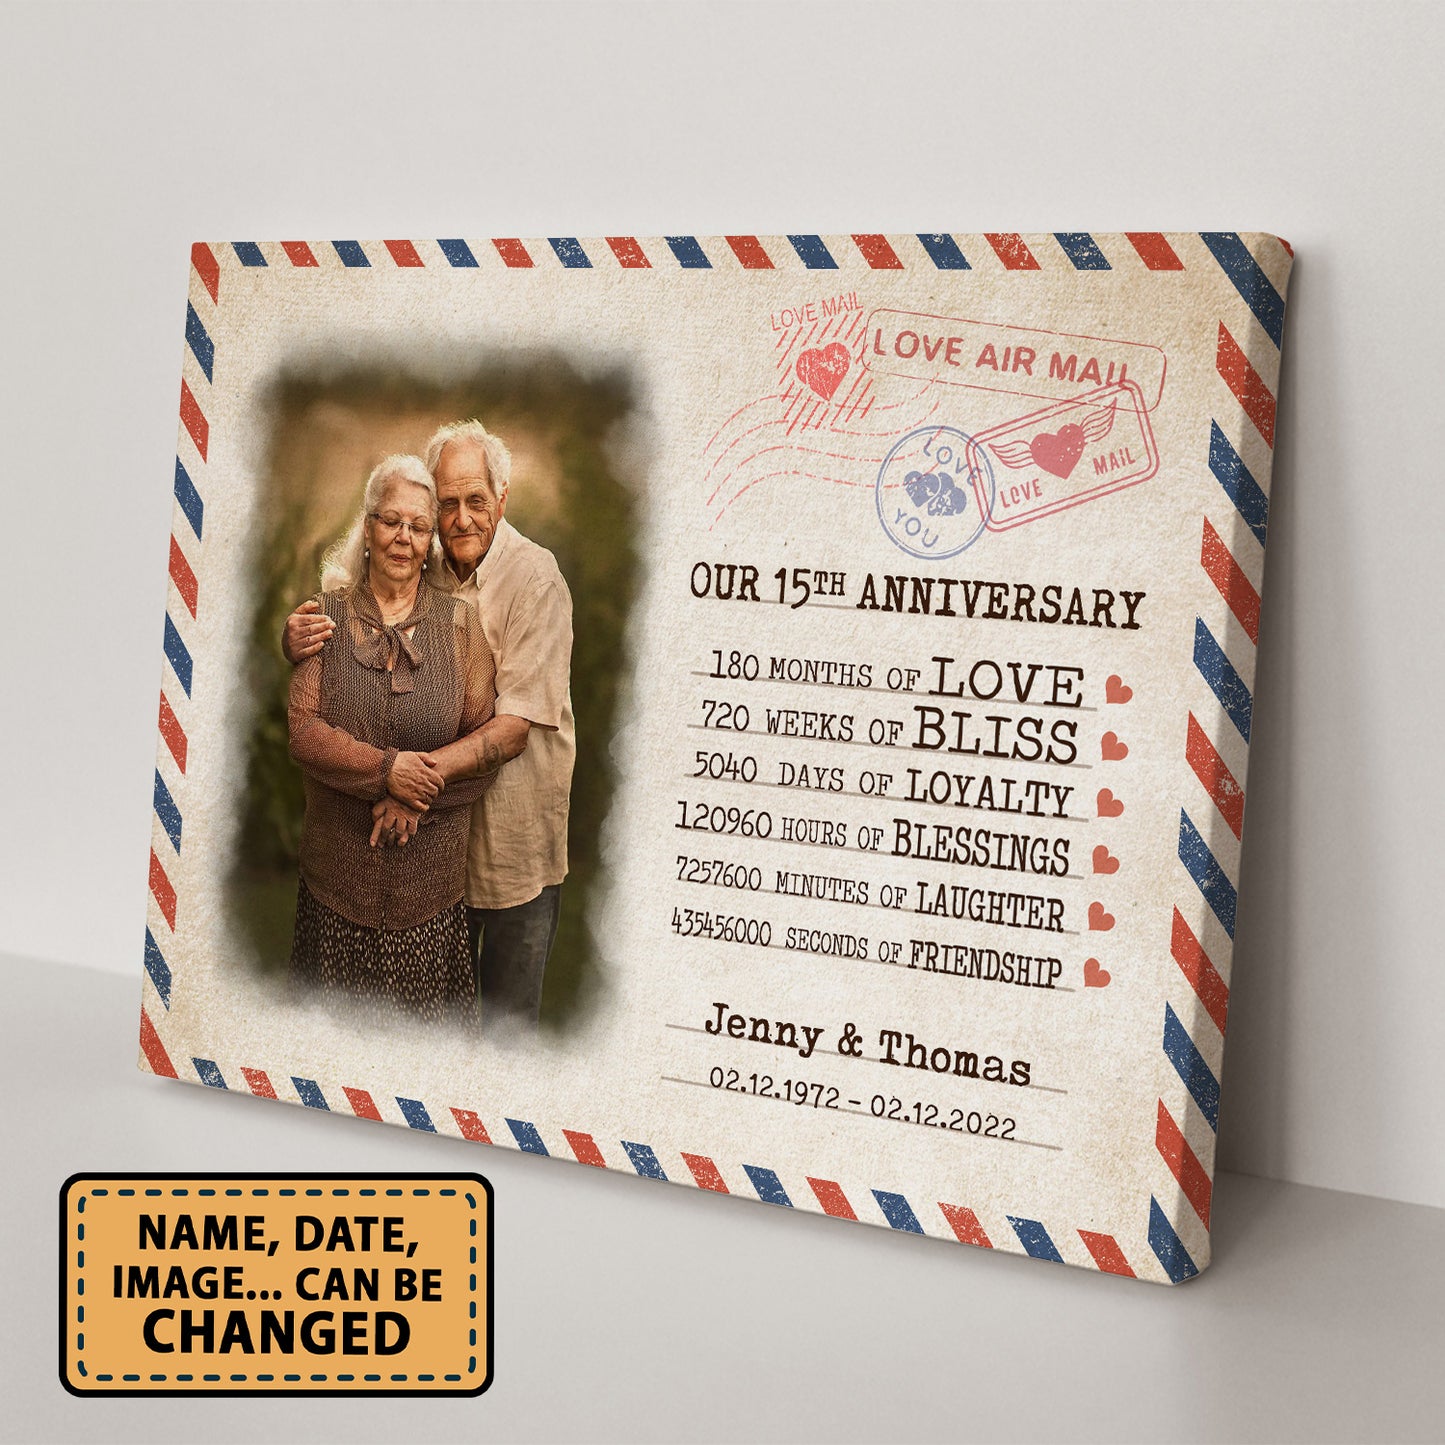 Our 15th Anniversary Letter Valentine Gift Personalized Canvas